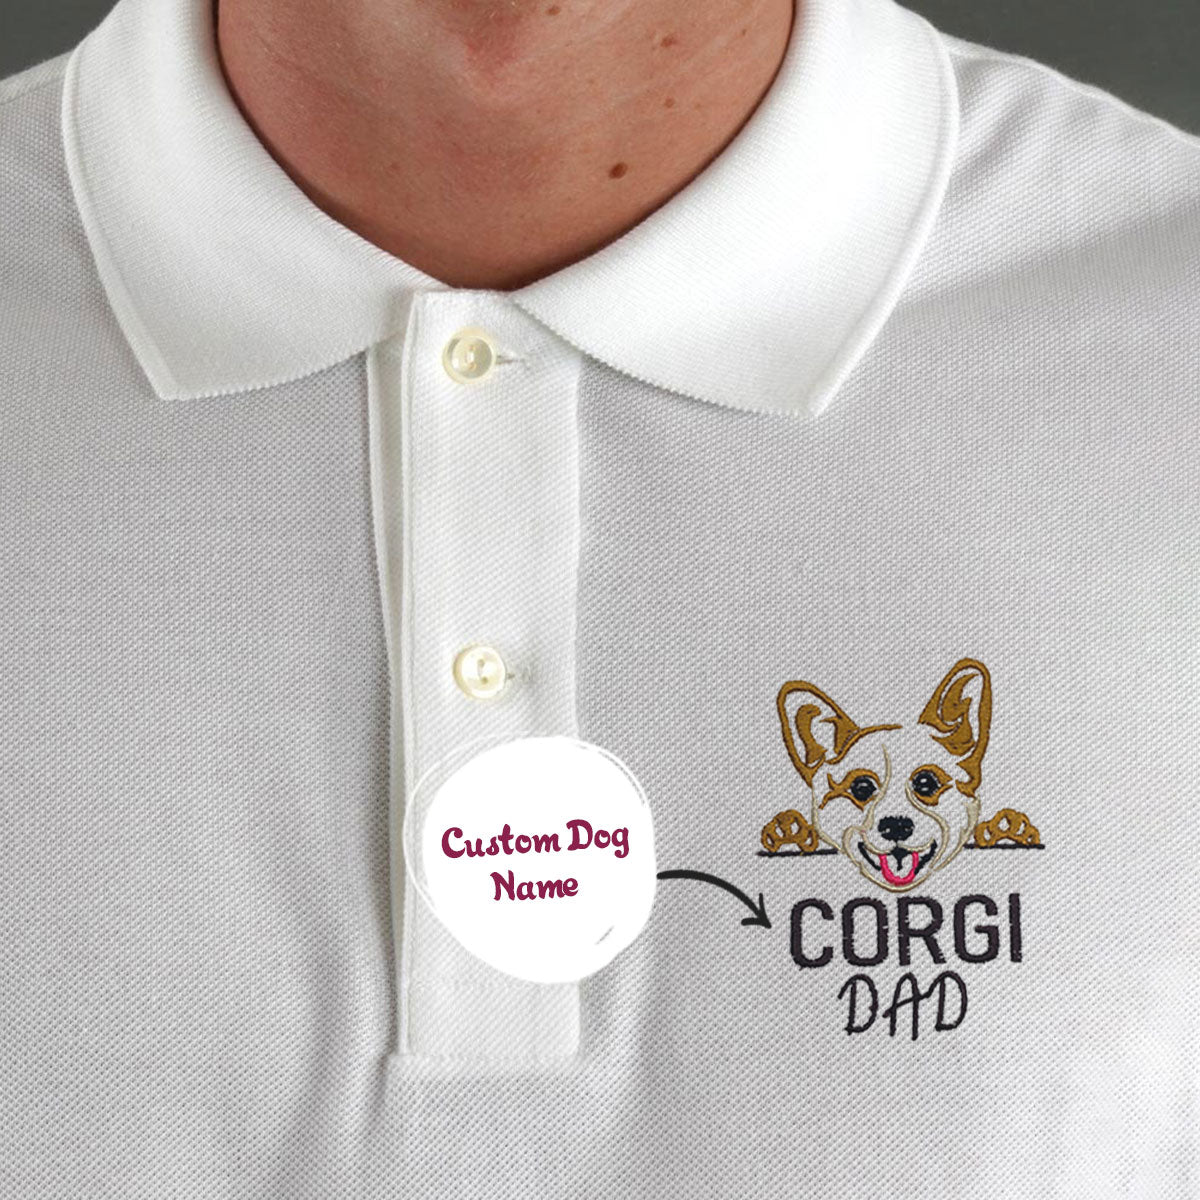 Custom Corgi Dog Dad Embroidered Apron, Personalized Apron with Dog Name, Best Gifts For Corgi Lovers